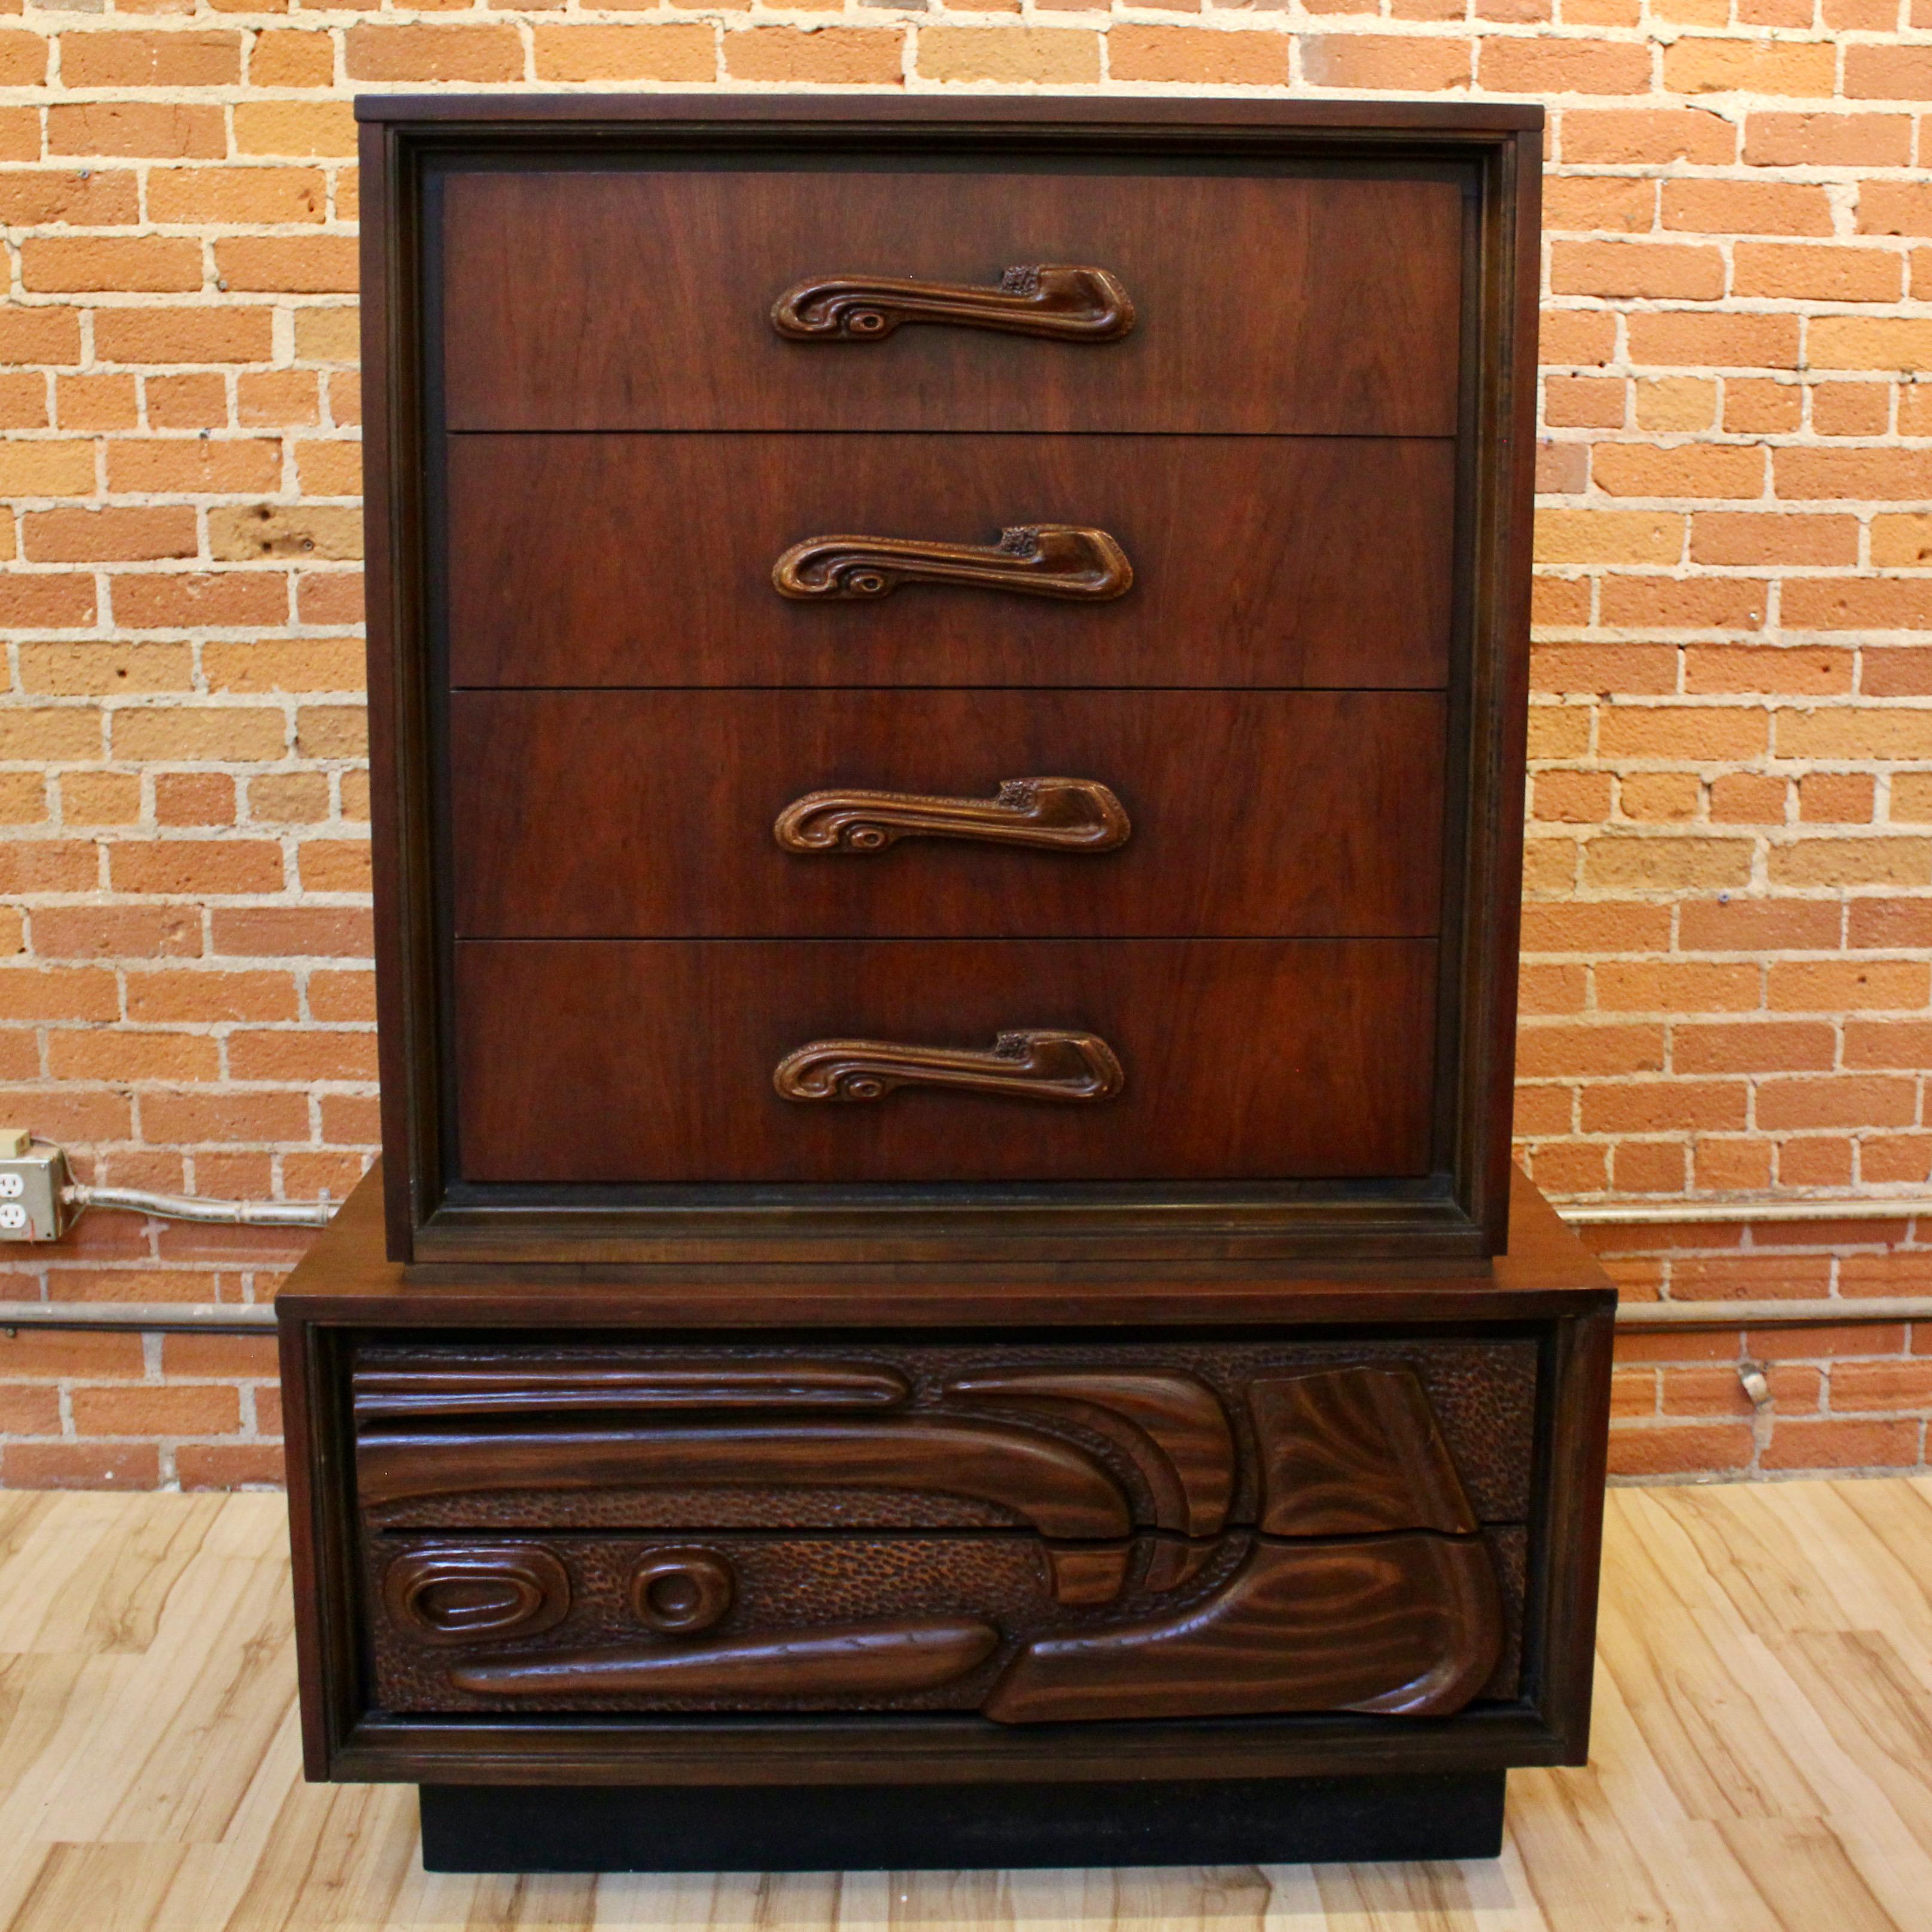 Mid-Century Modern “Oceanic” tall walnut chest of drawers by Pulaski Furniture. The chest has four drawers in the top section and three in the bottom, with carved detailing reminiscent of Paul Evans designs. In good vintage condition, with some wear